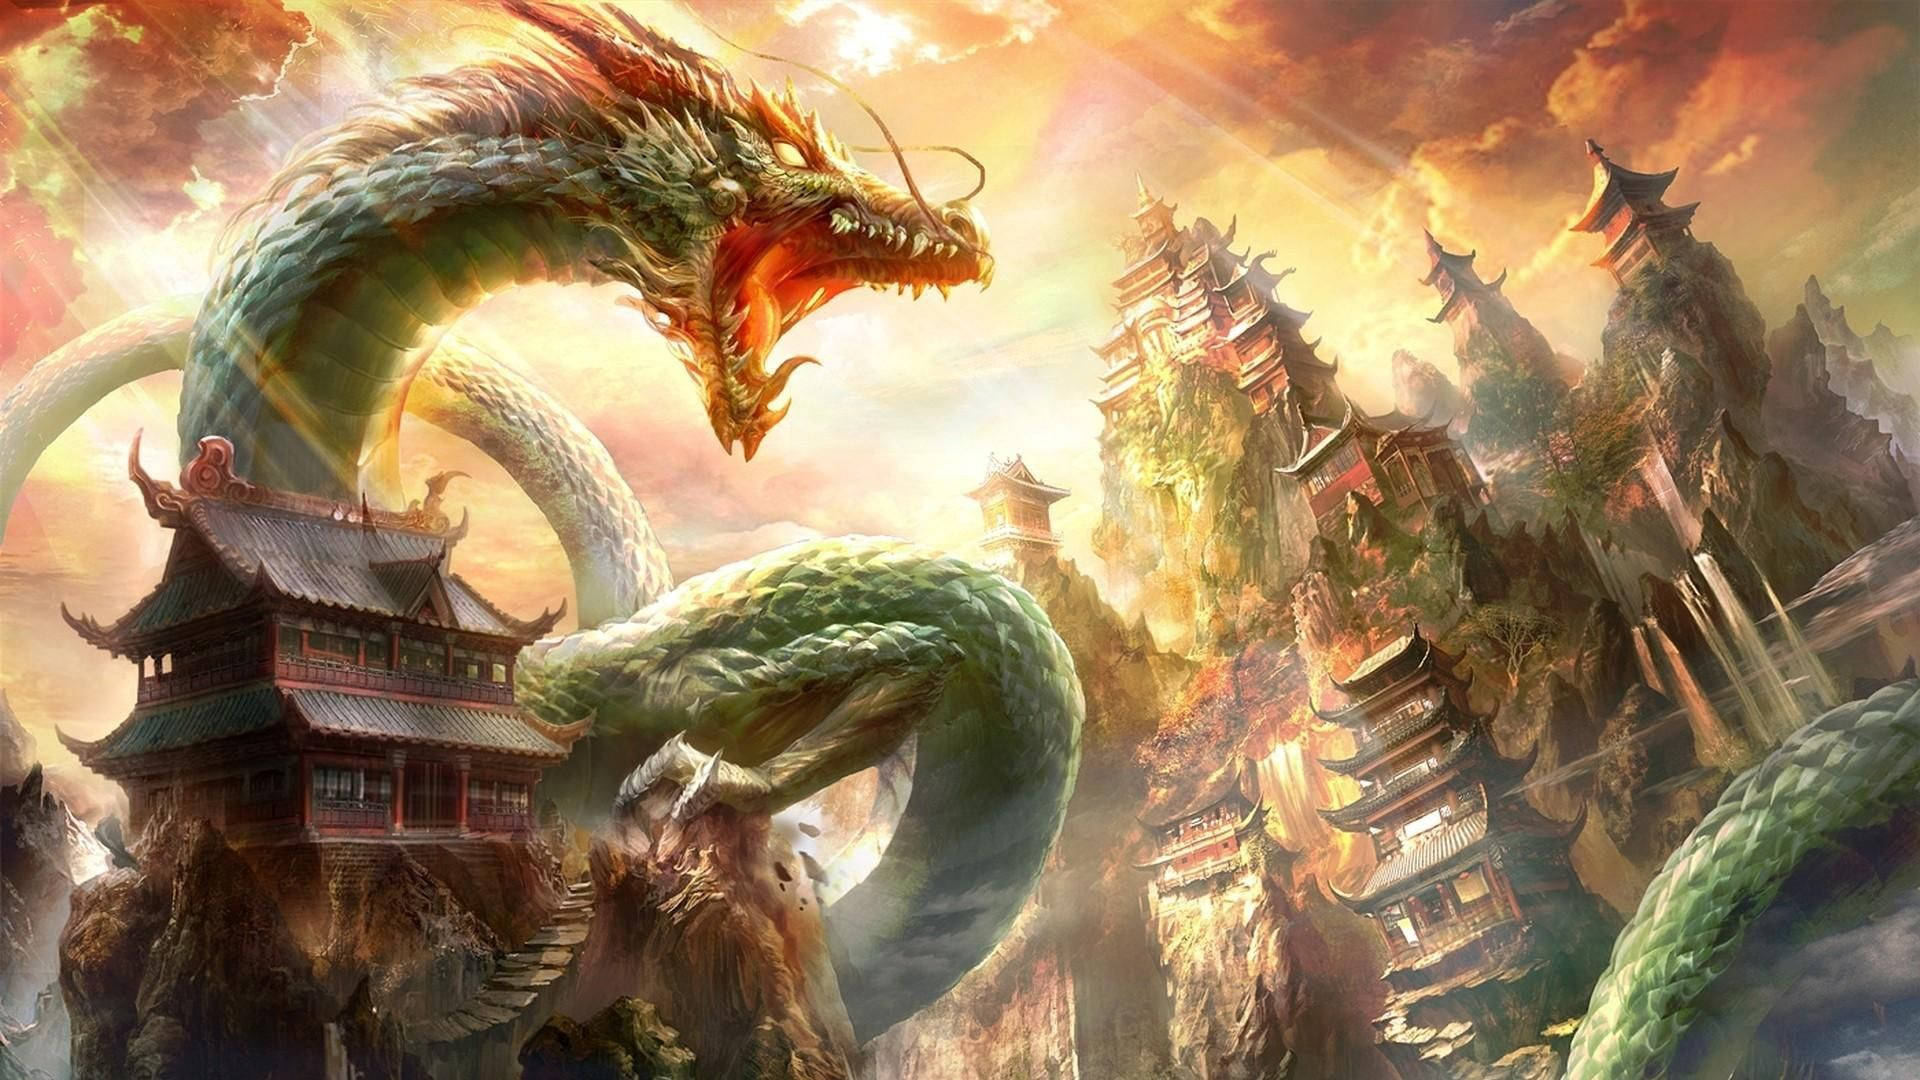 Coolest Dragon Attacks Chinse Temples Wallpaper